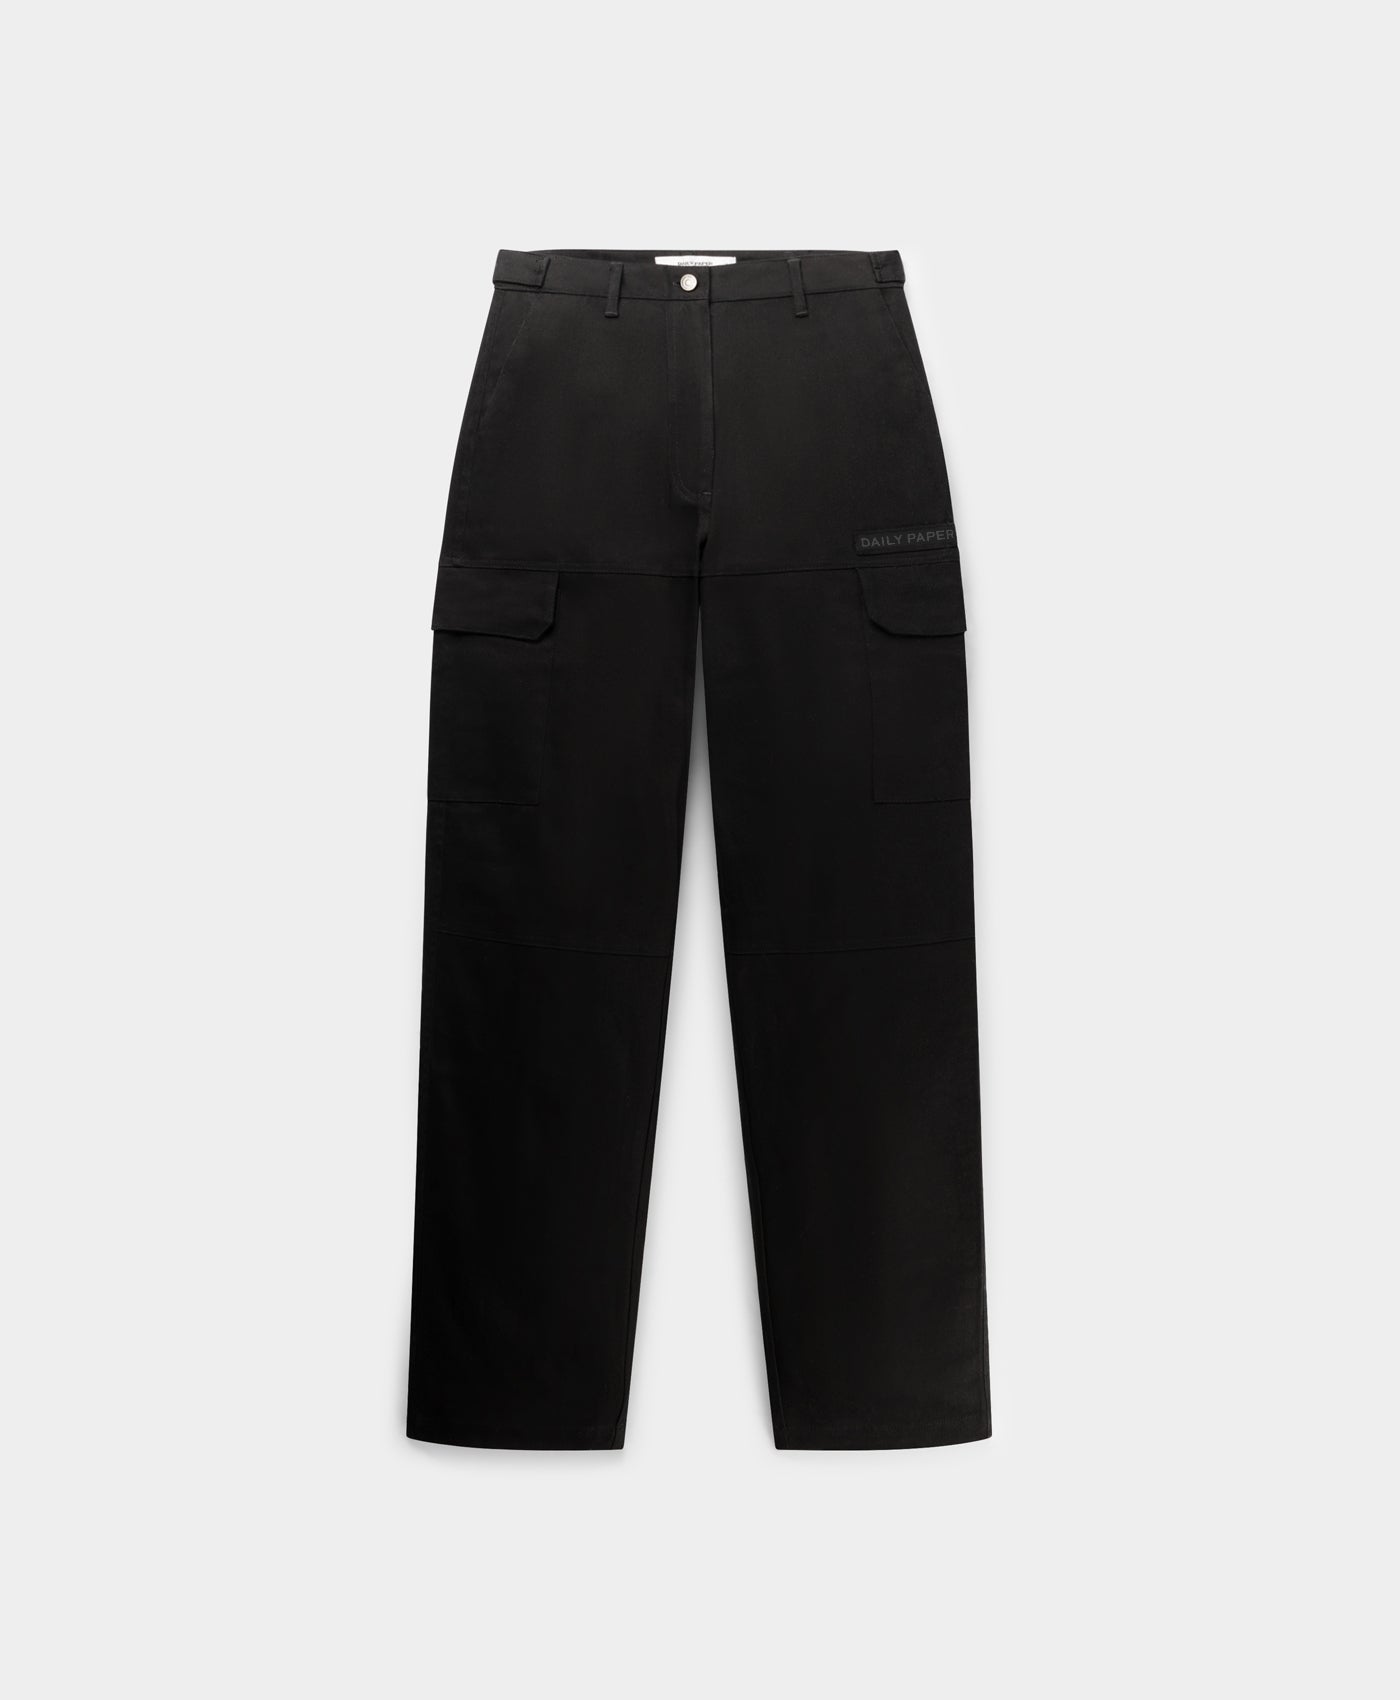 Black Cargo Pants for Women Sweatpants Polyester and Cottonwear